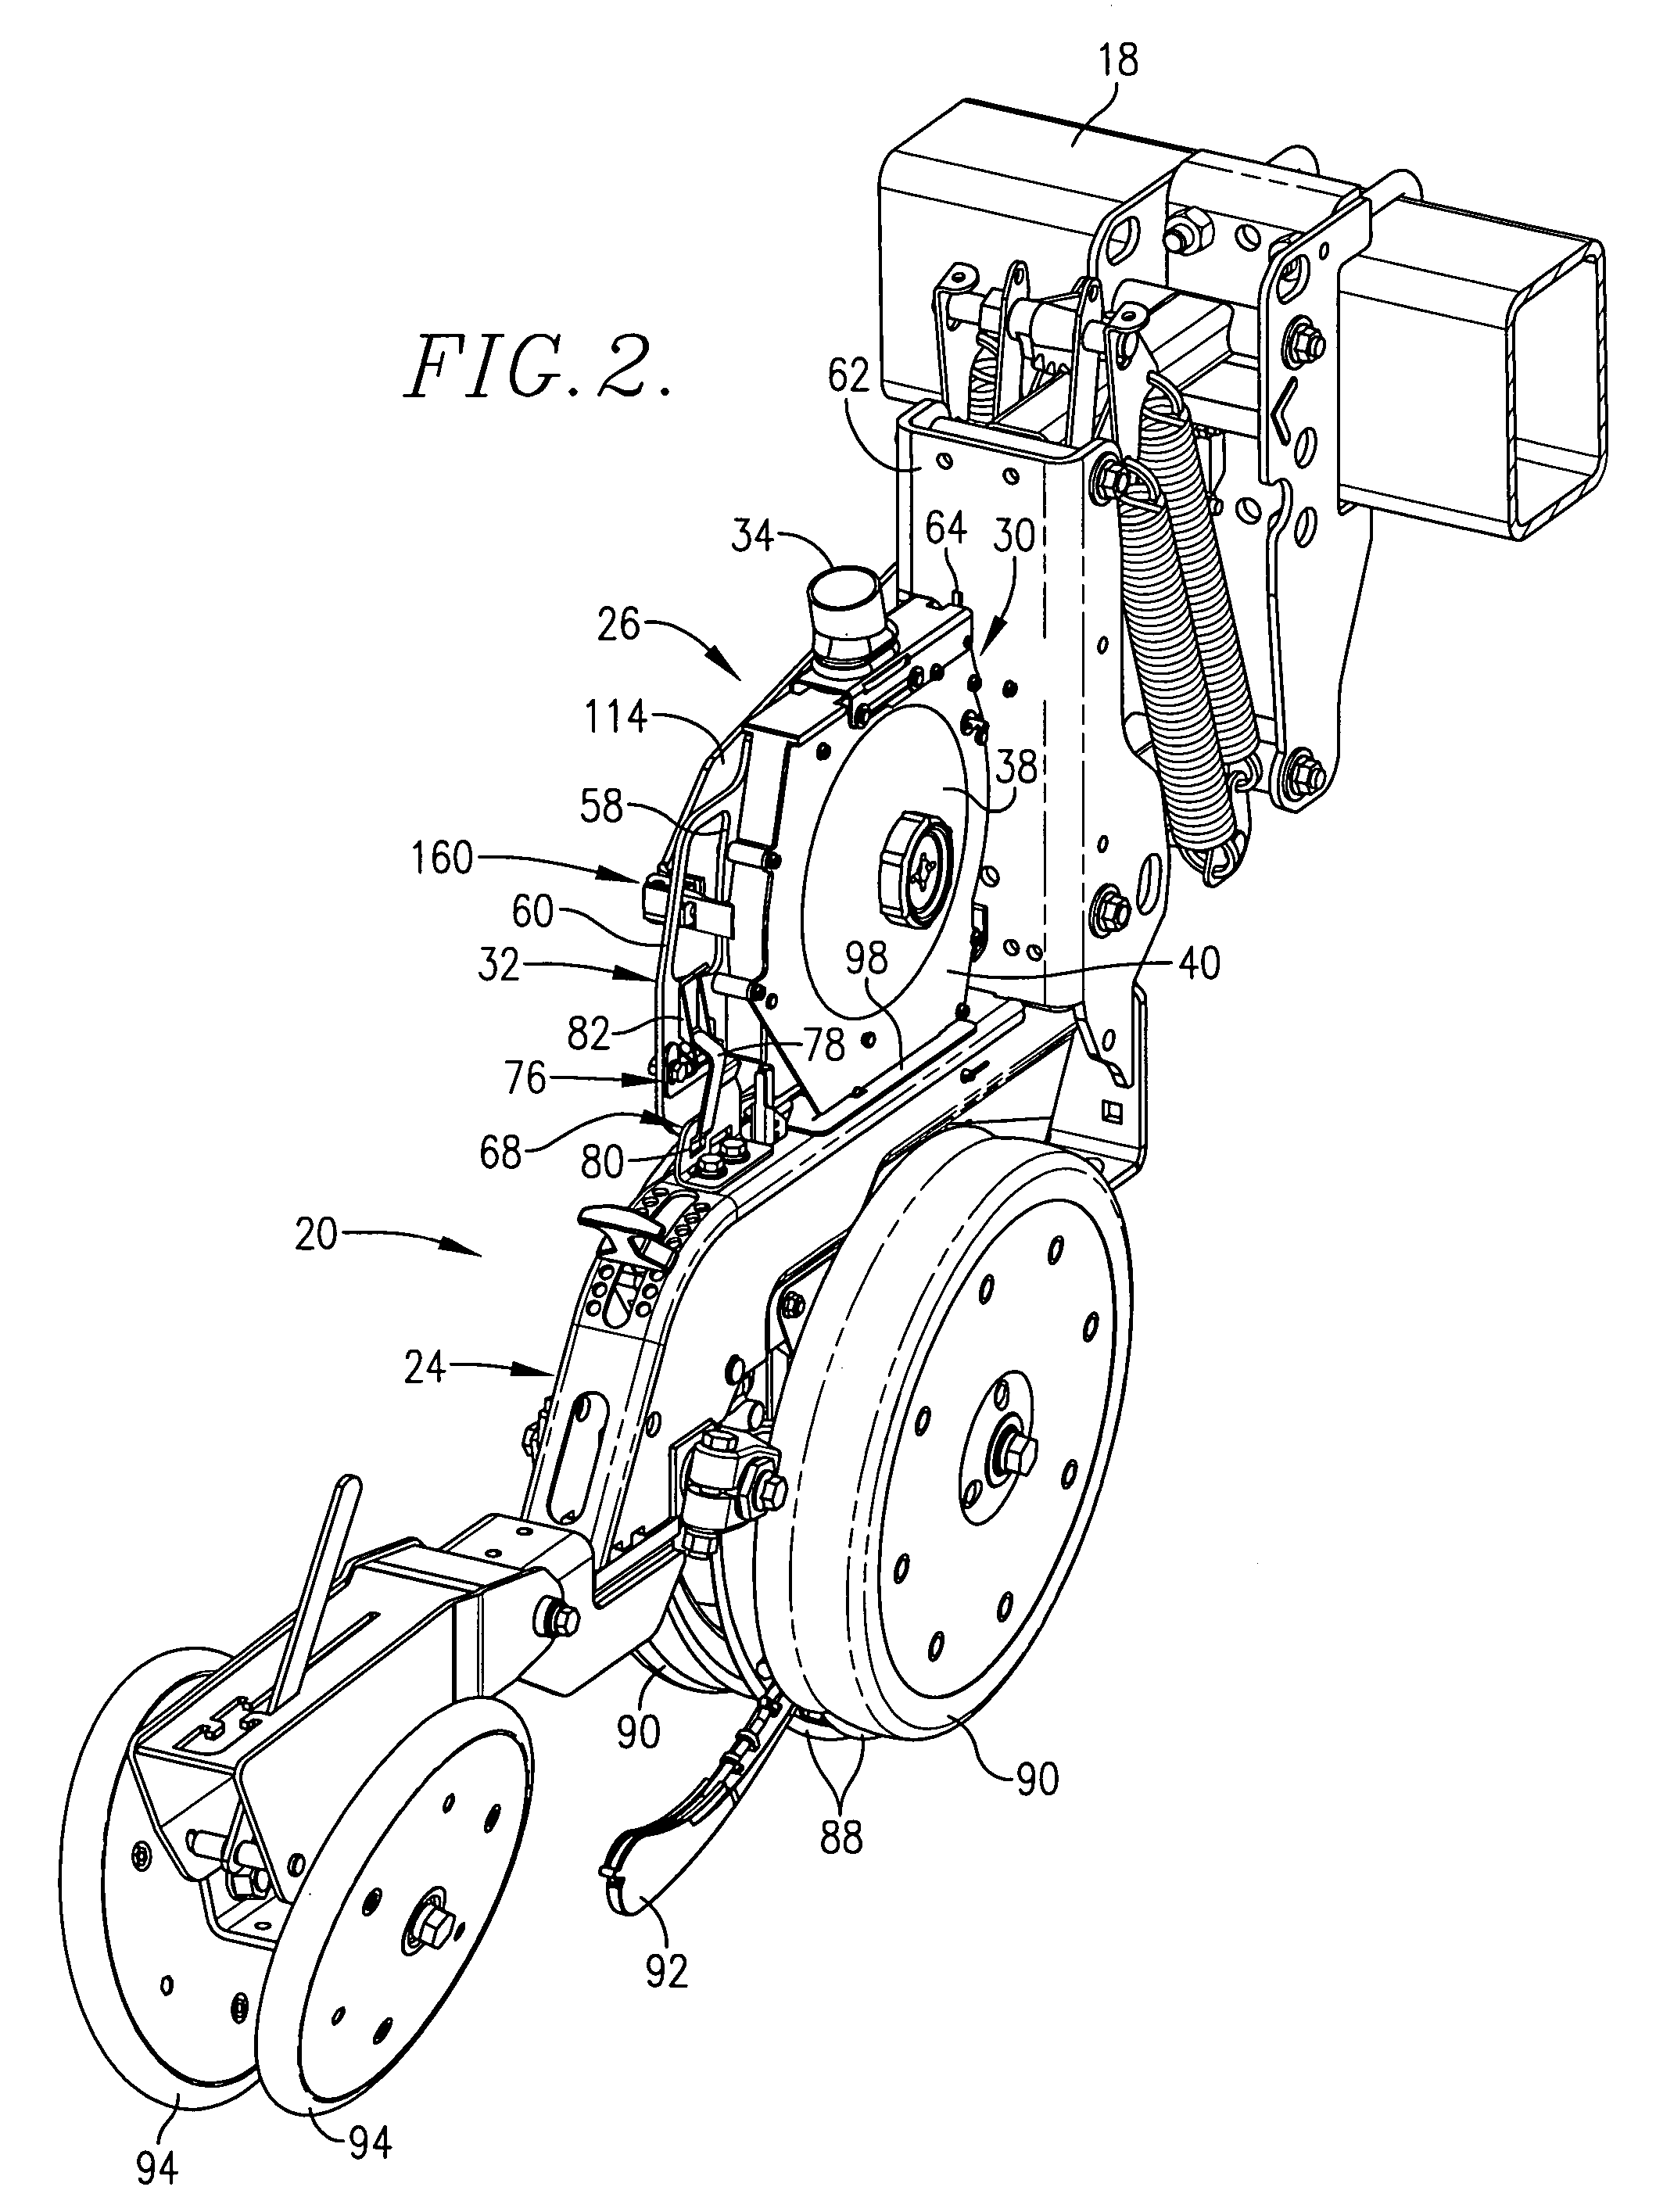 Agricultural planting machine having interchangeable seed meters